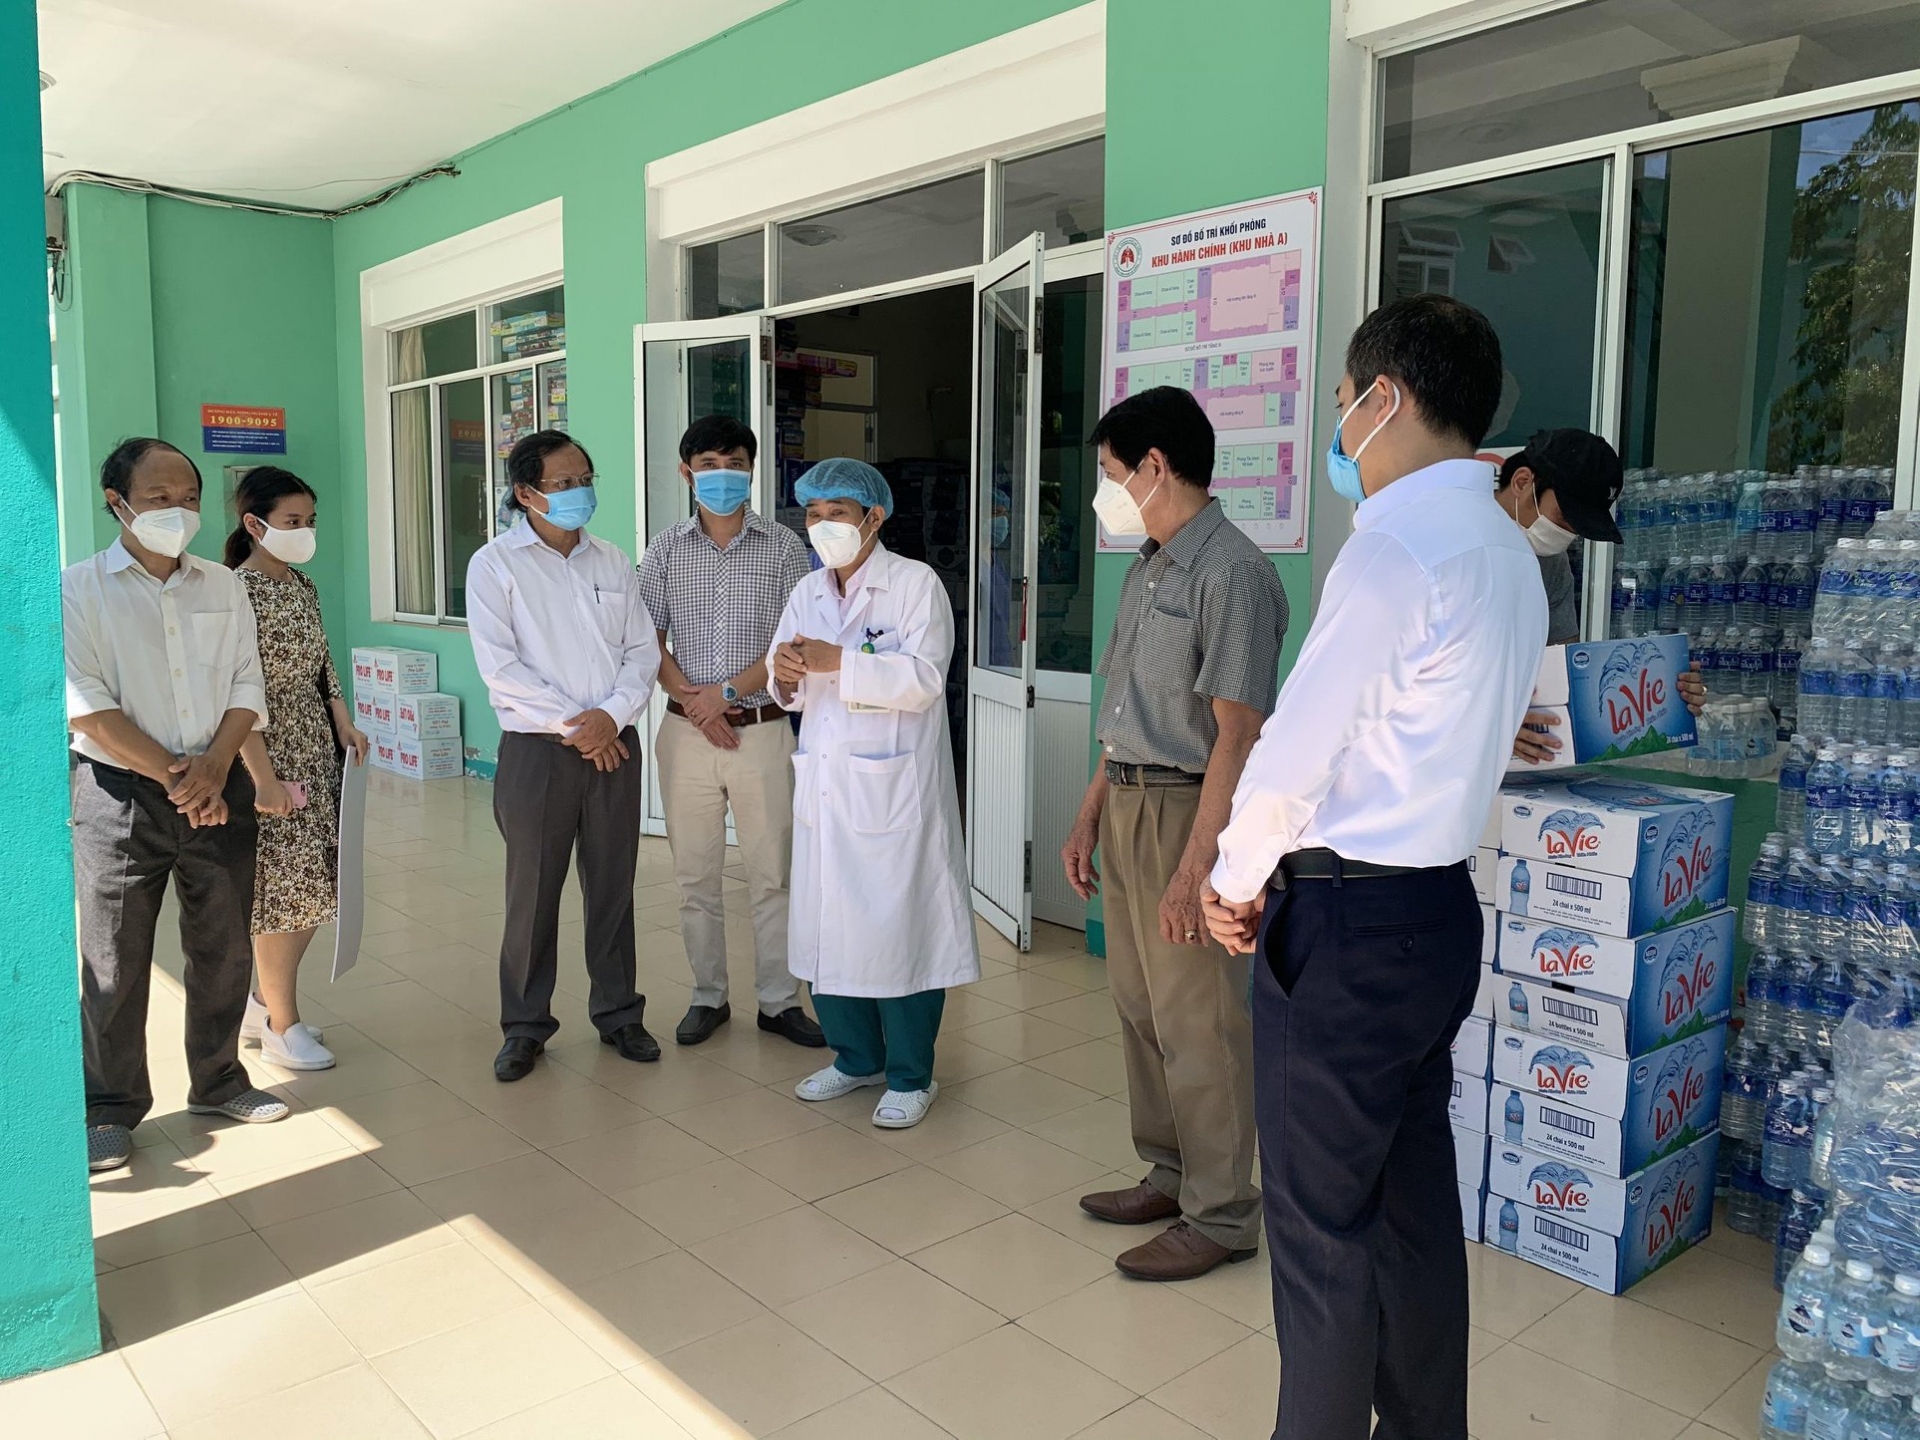 Donations continue to strengthen covid 19 fight in da nang